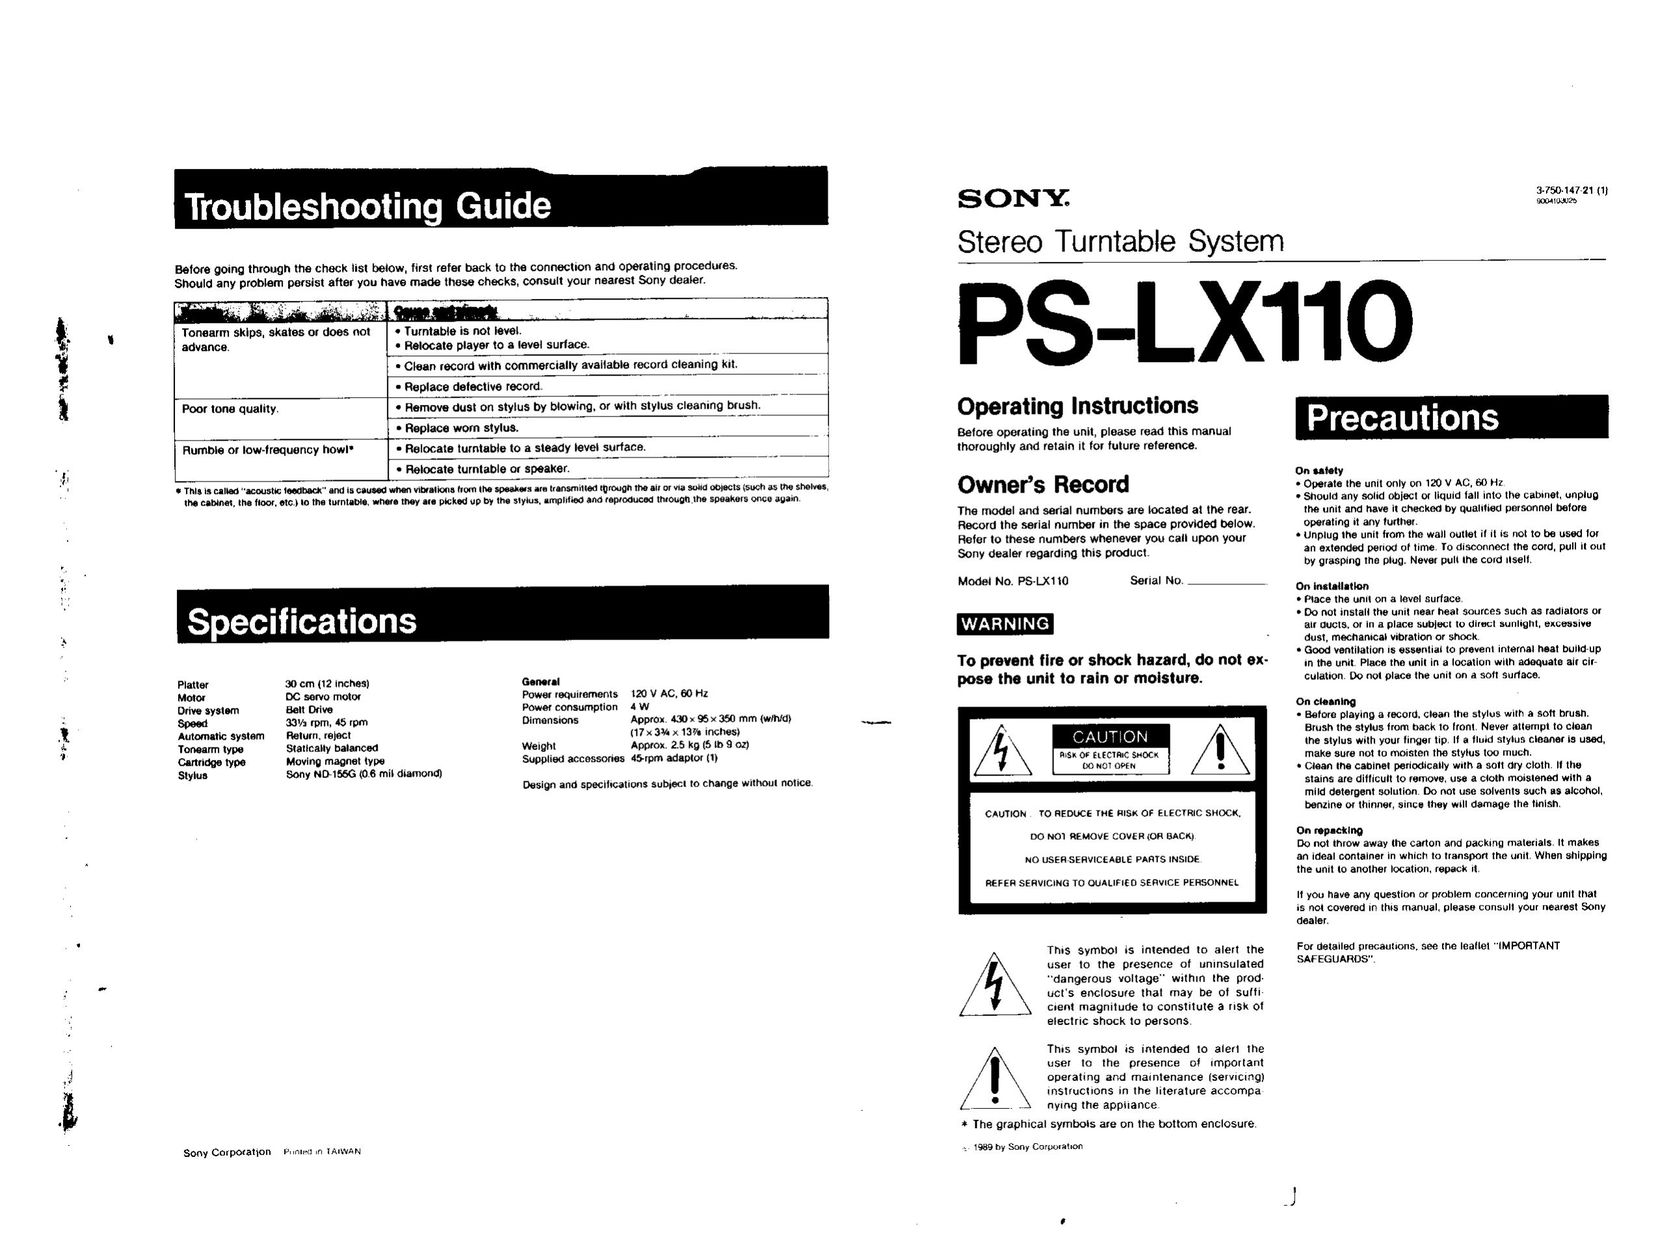 Sony PS-LX110 Turntable User Manual